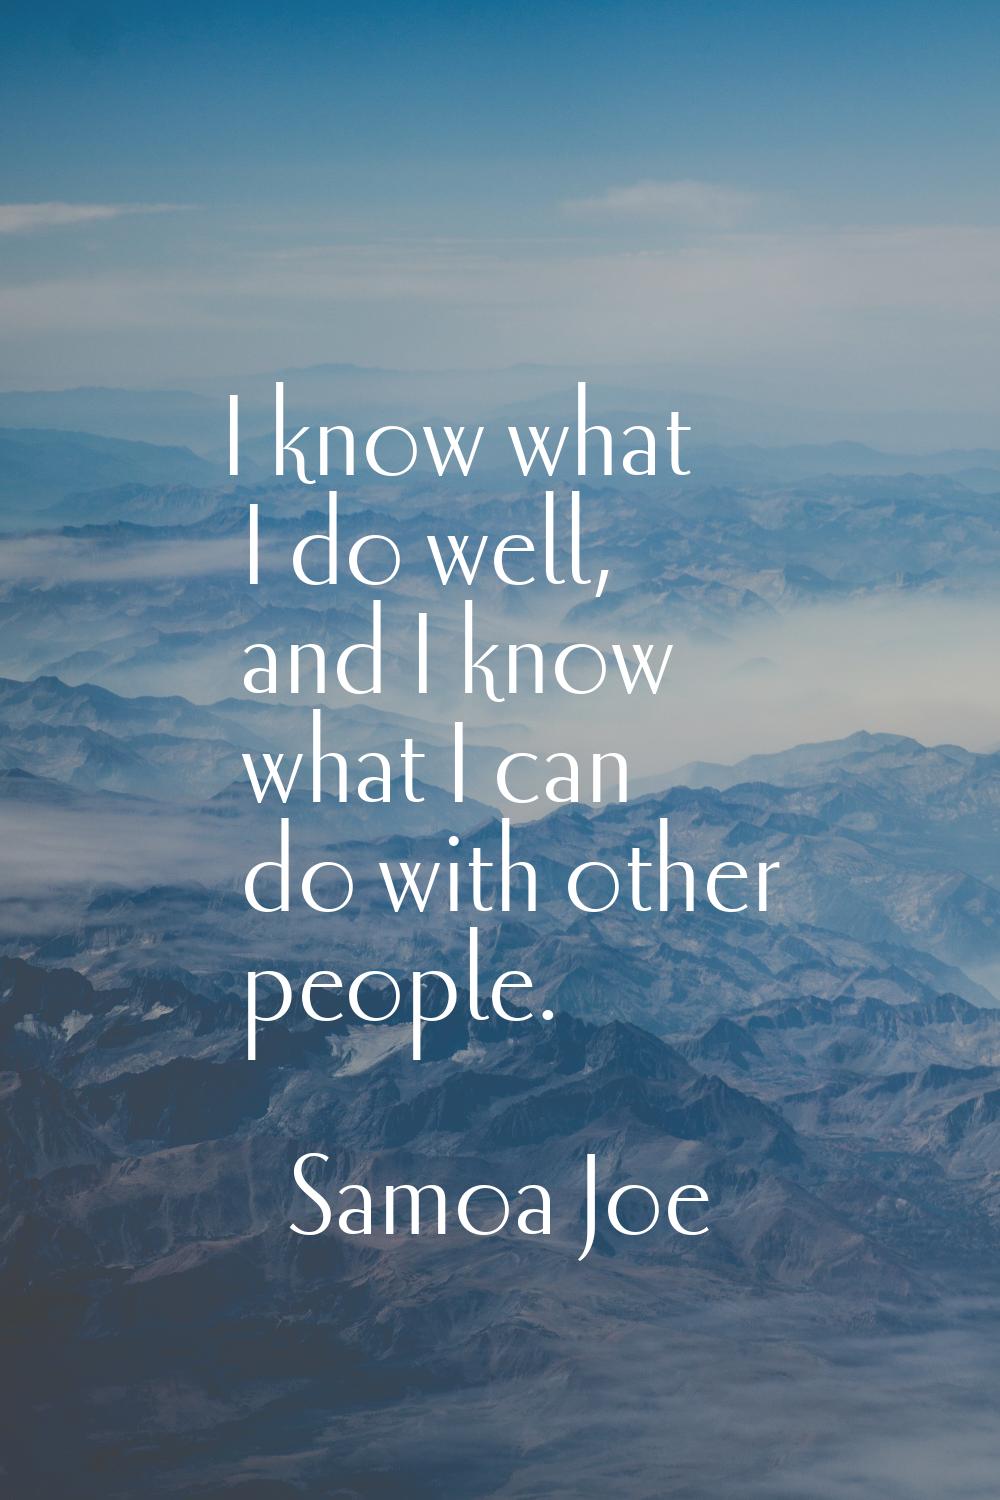 I know what I do well, and I know what I can do with other people.